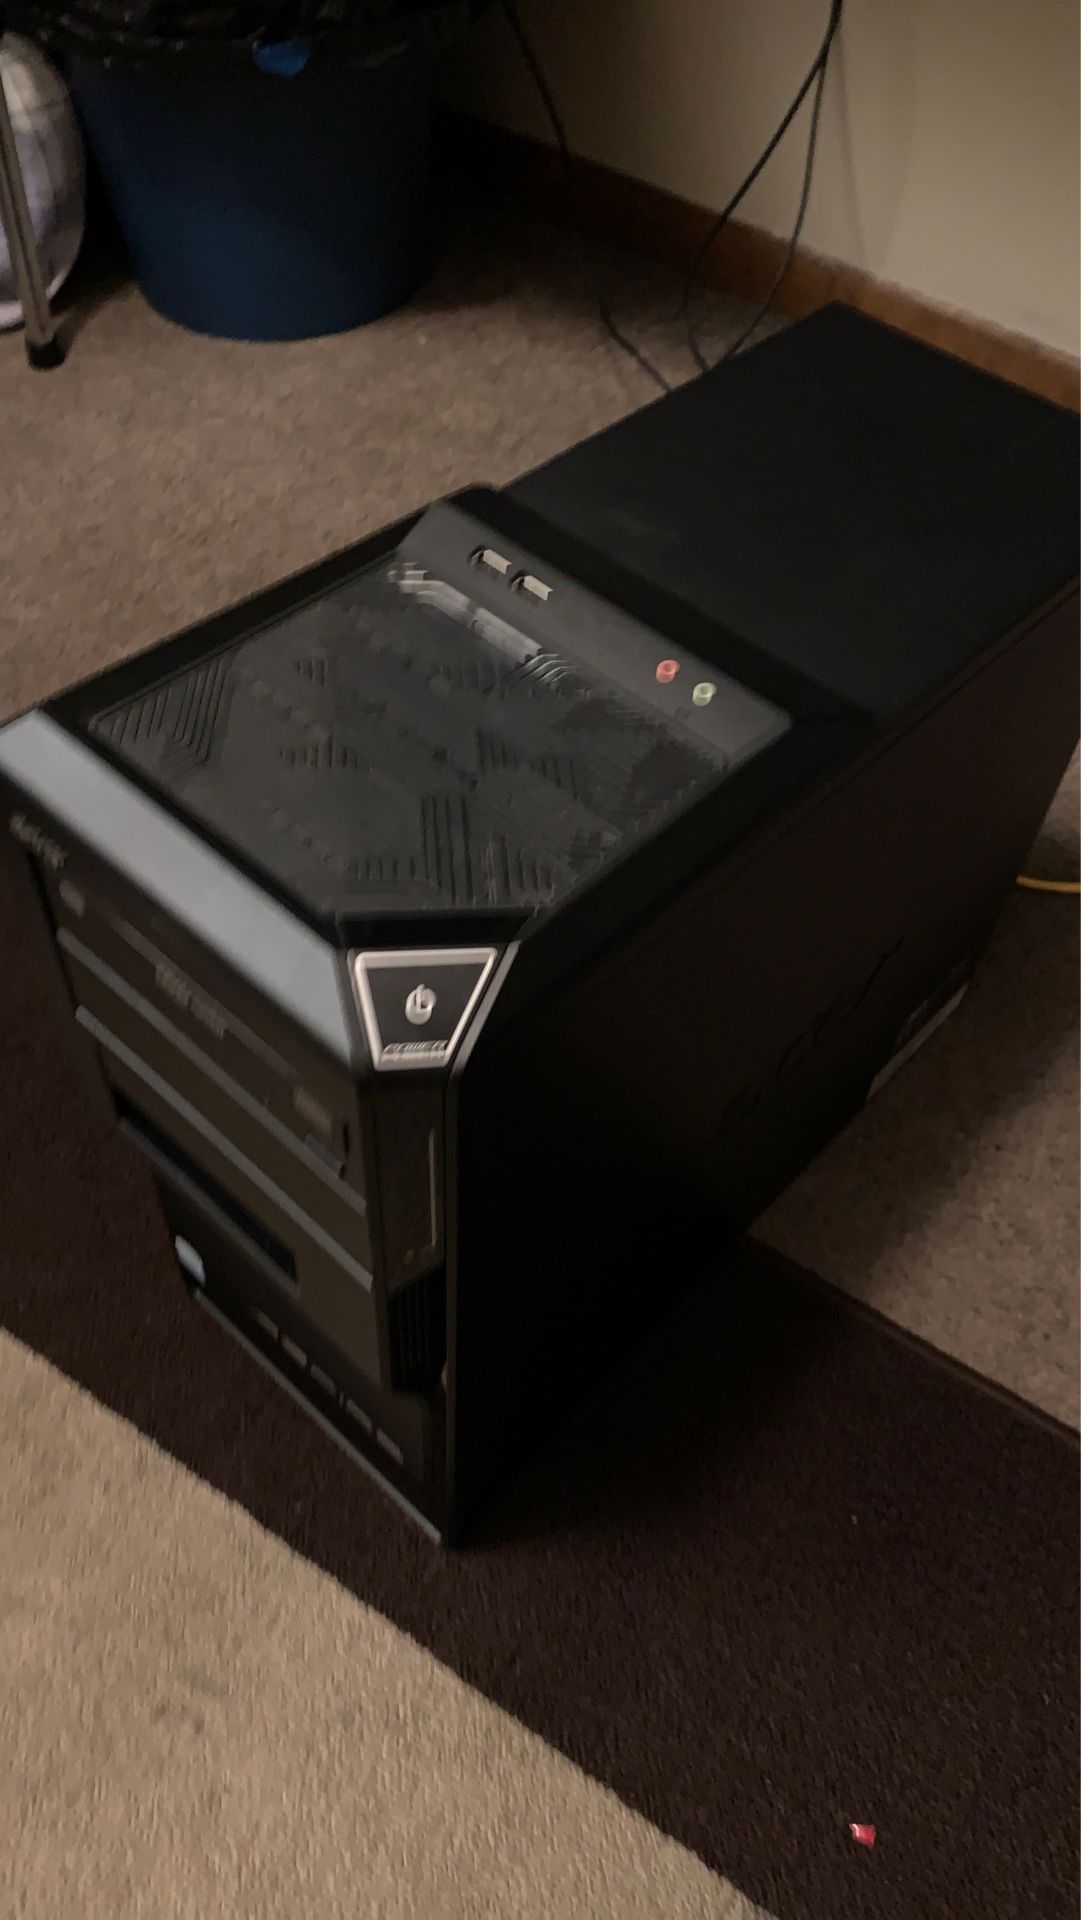 Acer computer for parts